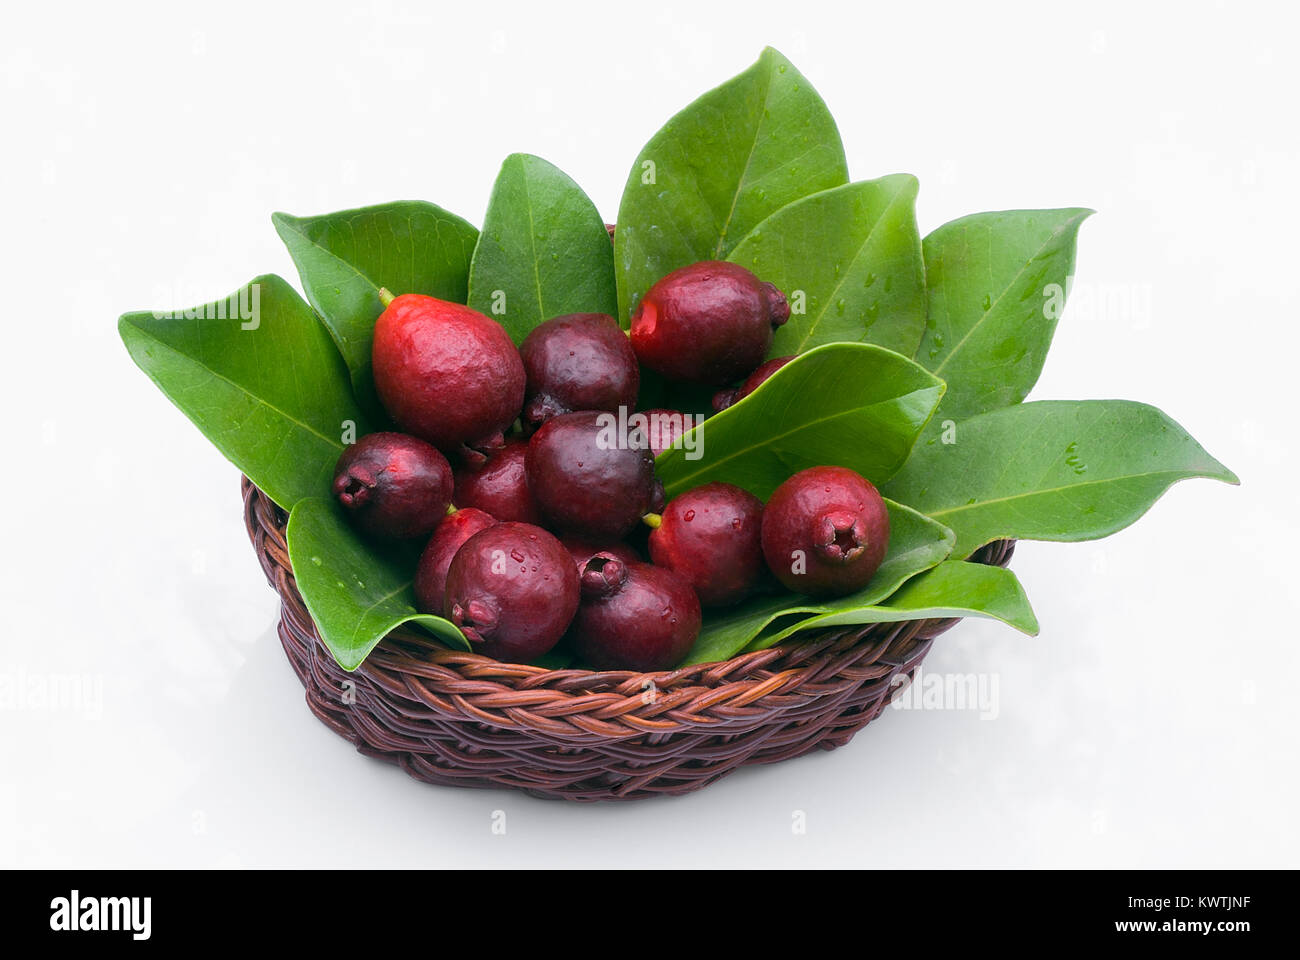 Cattley guava (Psidium littorale subsp. longipes) or Peruvian guava or Red Cherry Guava or Strawberry guava or Psidium cattleianum or Psidium chinense Stock Photo